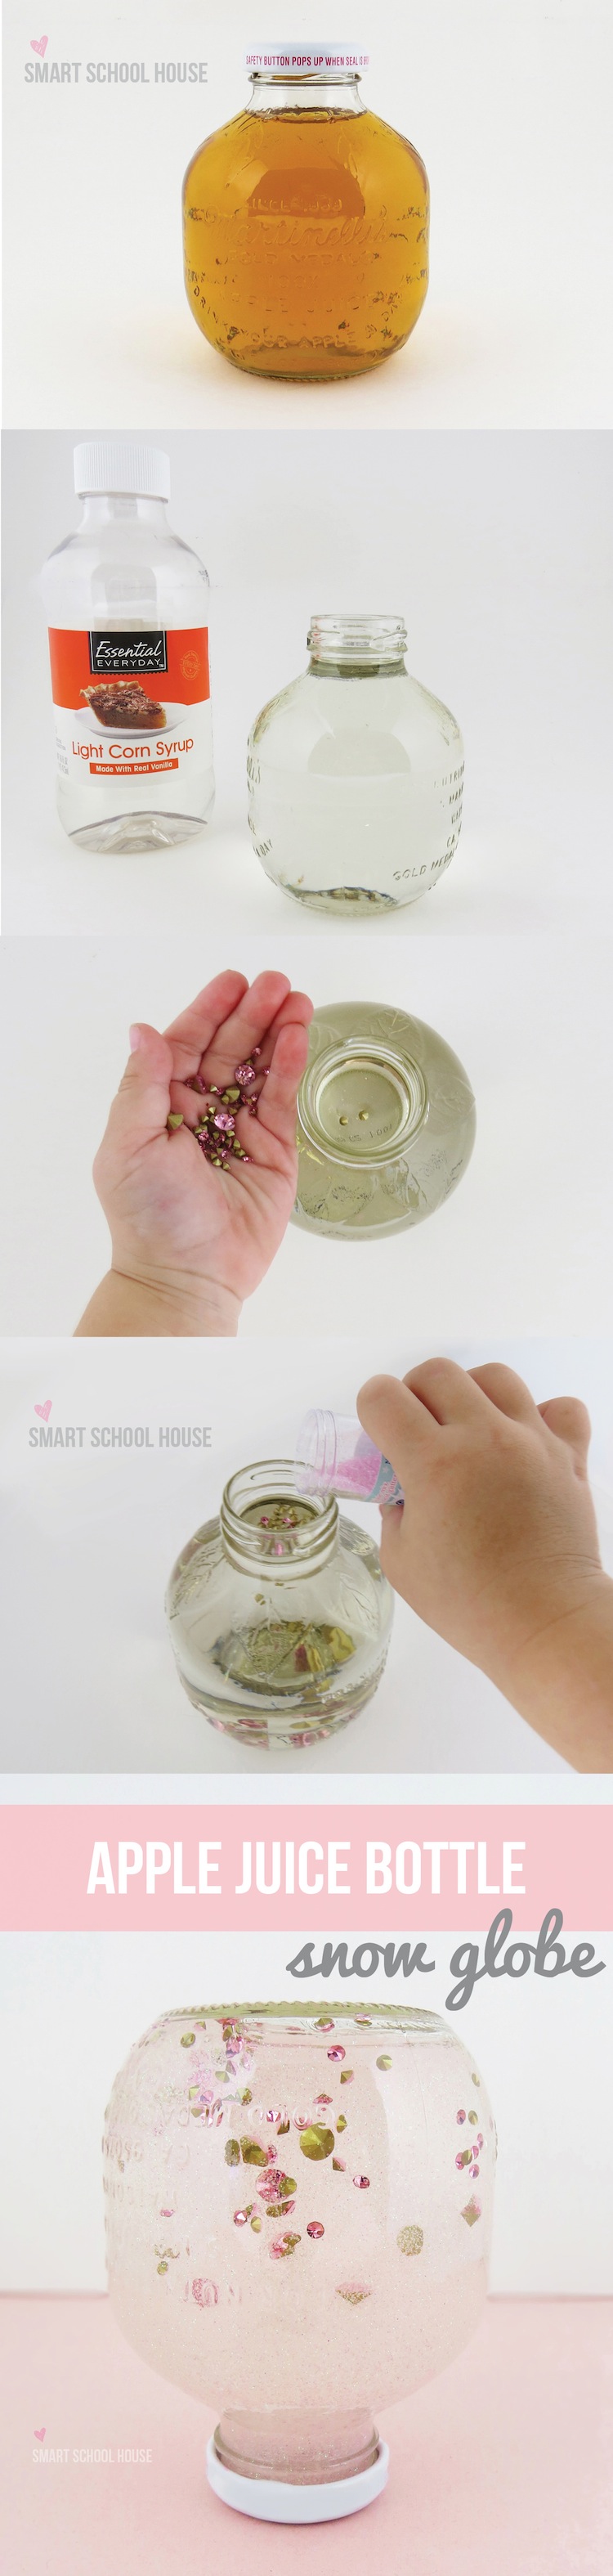 How to make an Apple Juice Bottle Snow Globe. A fun activity for kids to make!